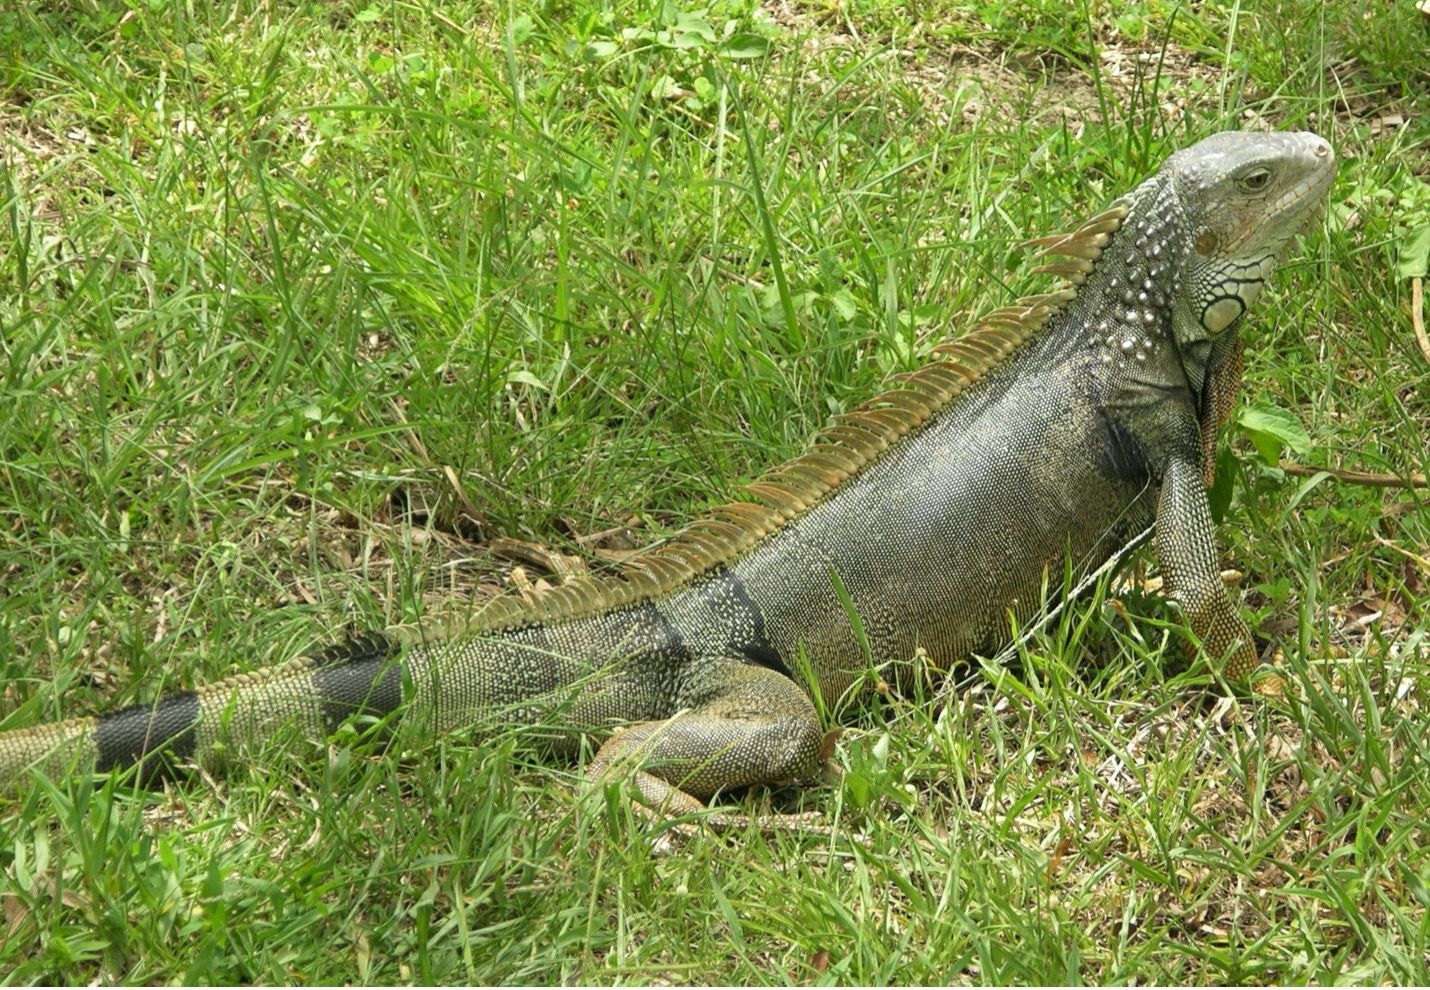 Adult green iguanas (Iguana iguana) may be a dull green or olive color. 